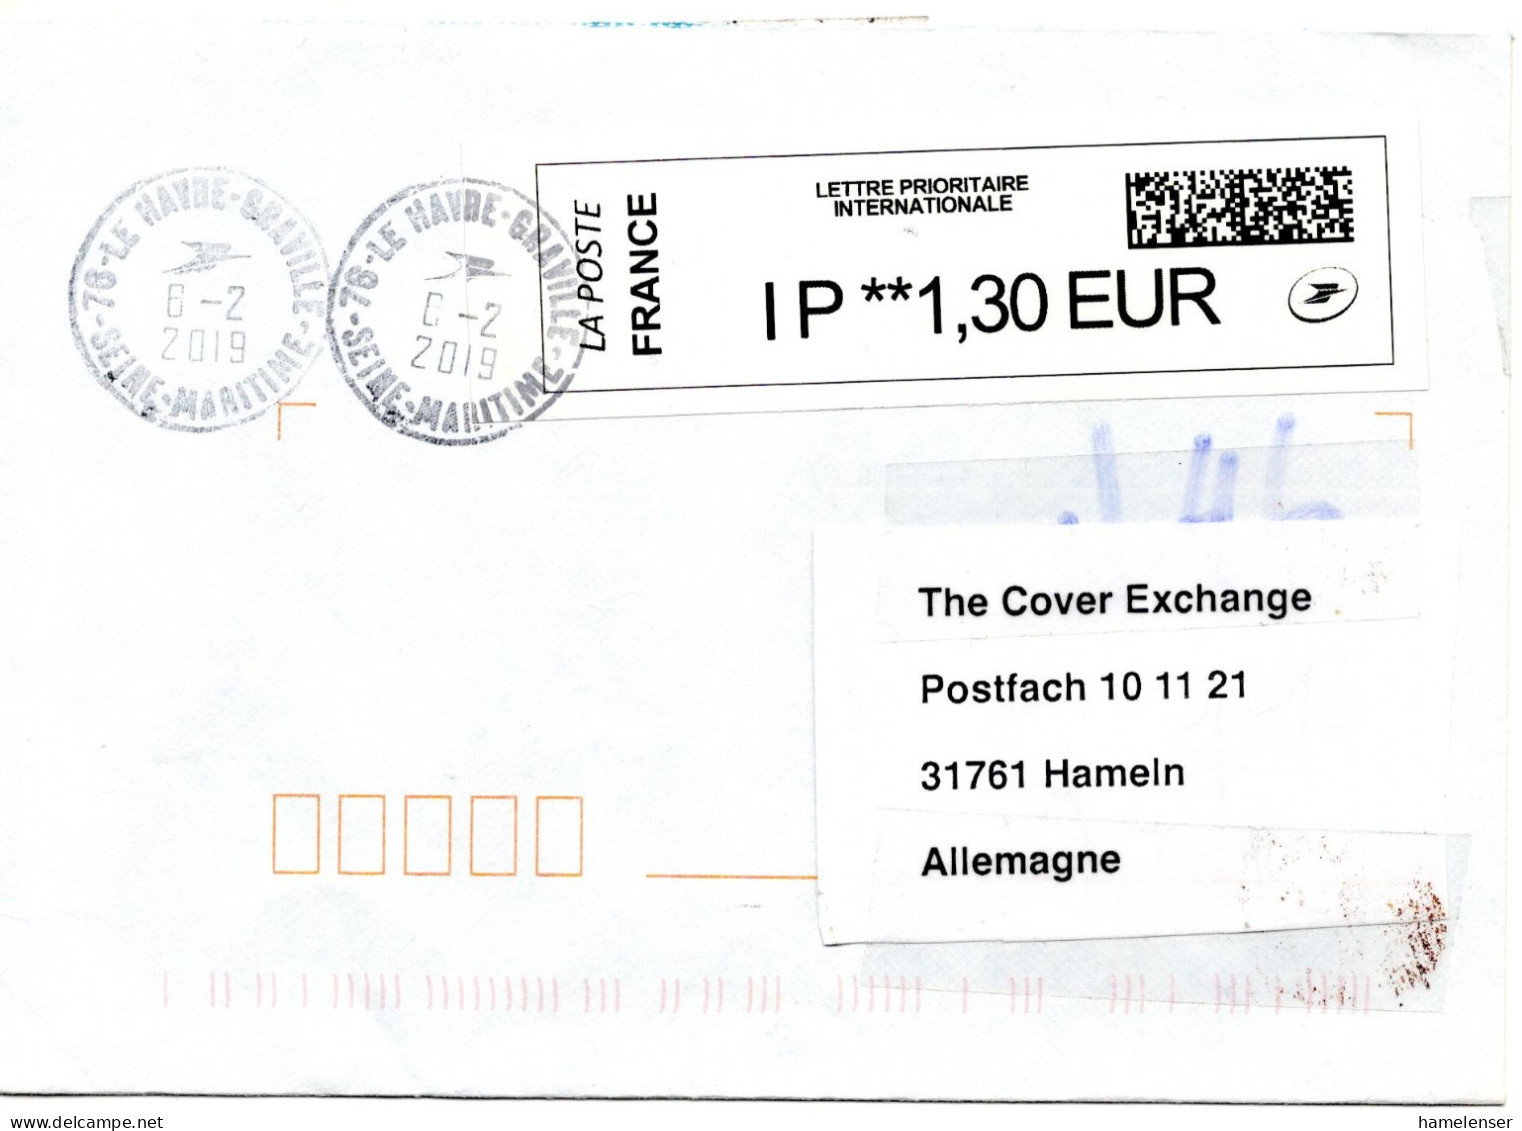 61246 - Frankreich - 2019 - €1,30 ATM EF A Bf LE HAVRE -> Deutschland - Lettres & Documents